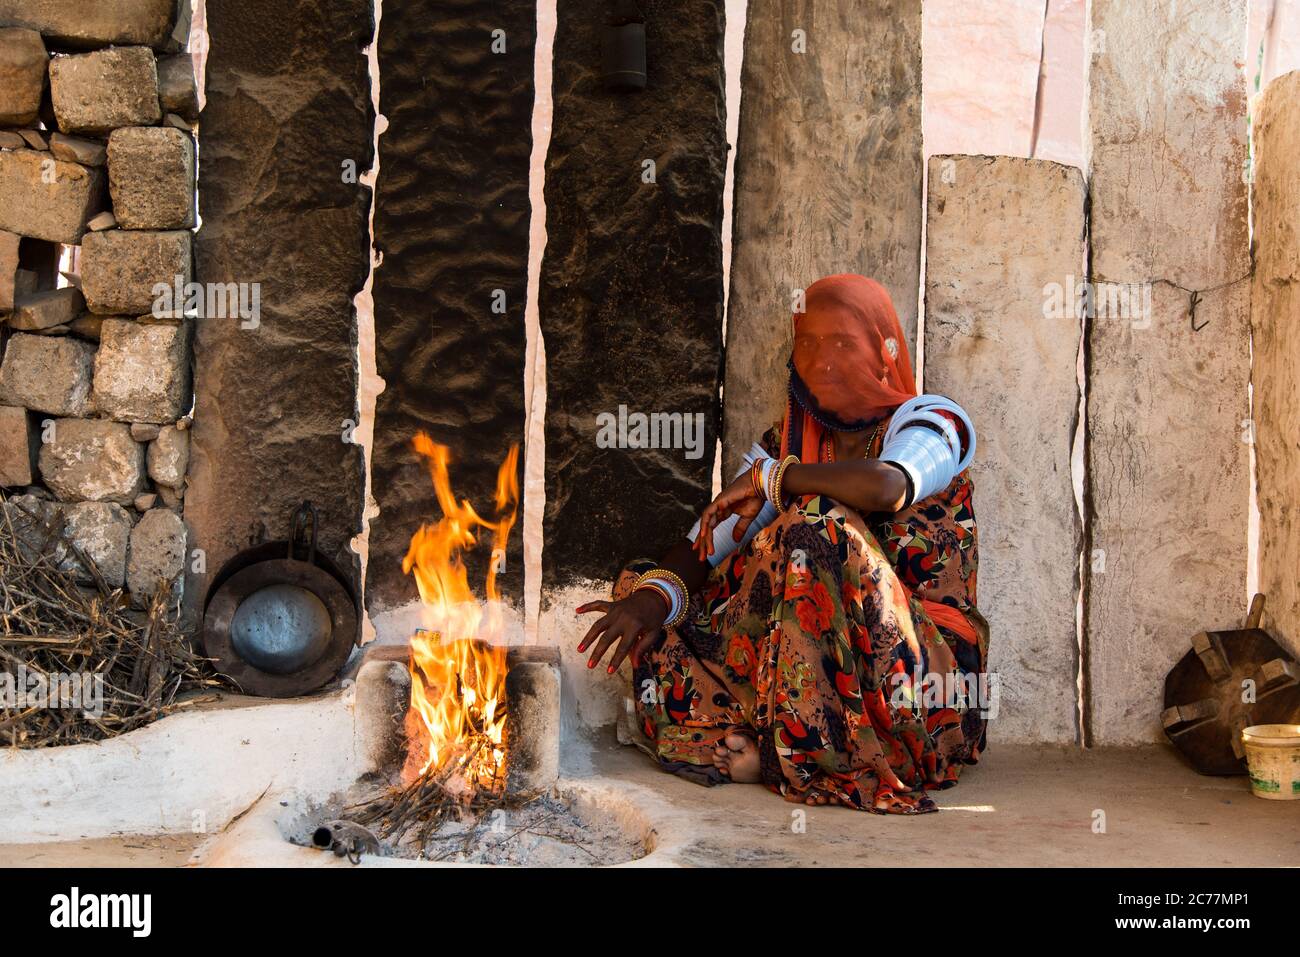 An Indian young woman at her home in a village. Stock Photo